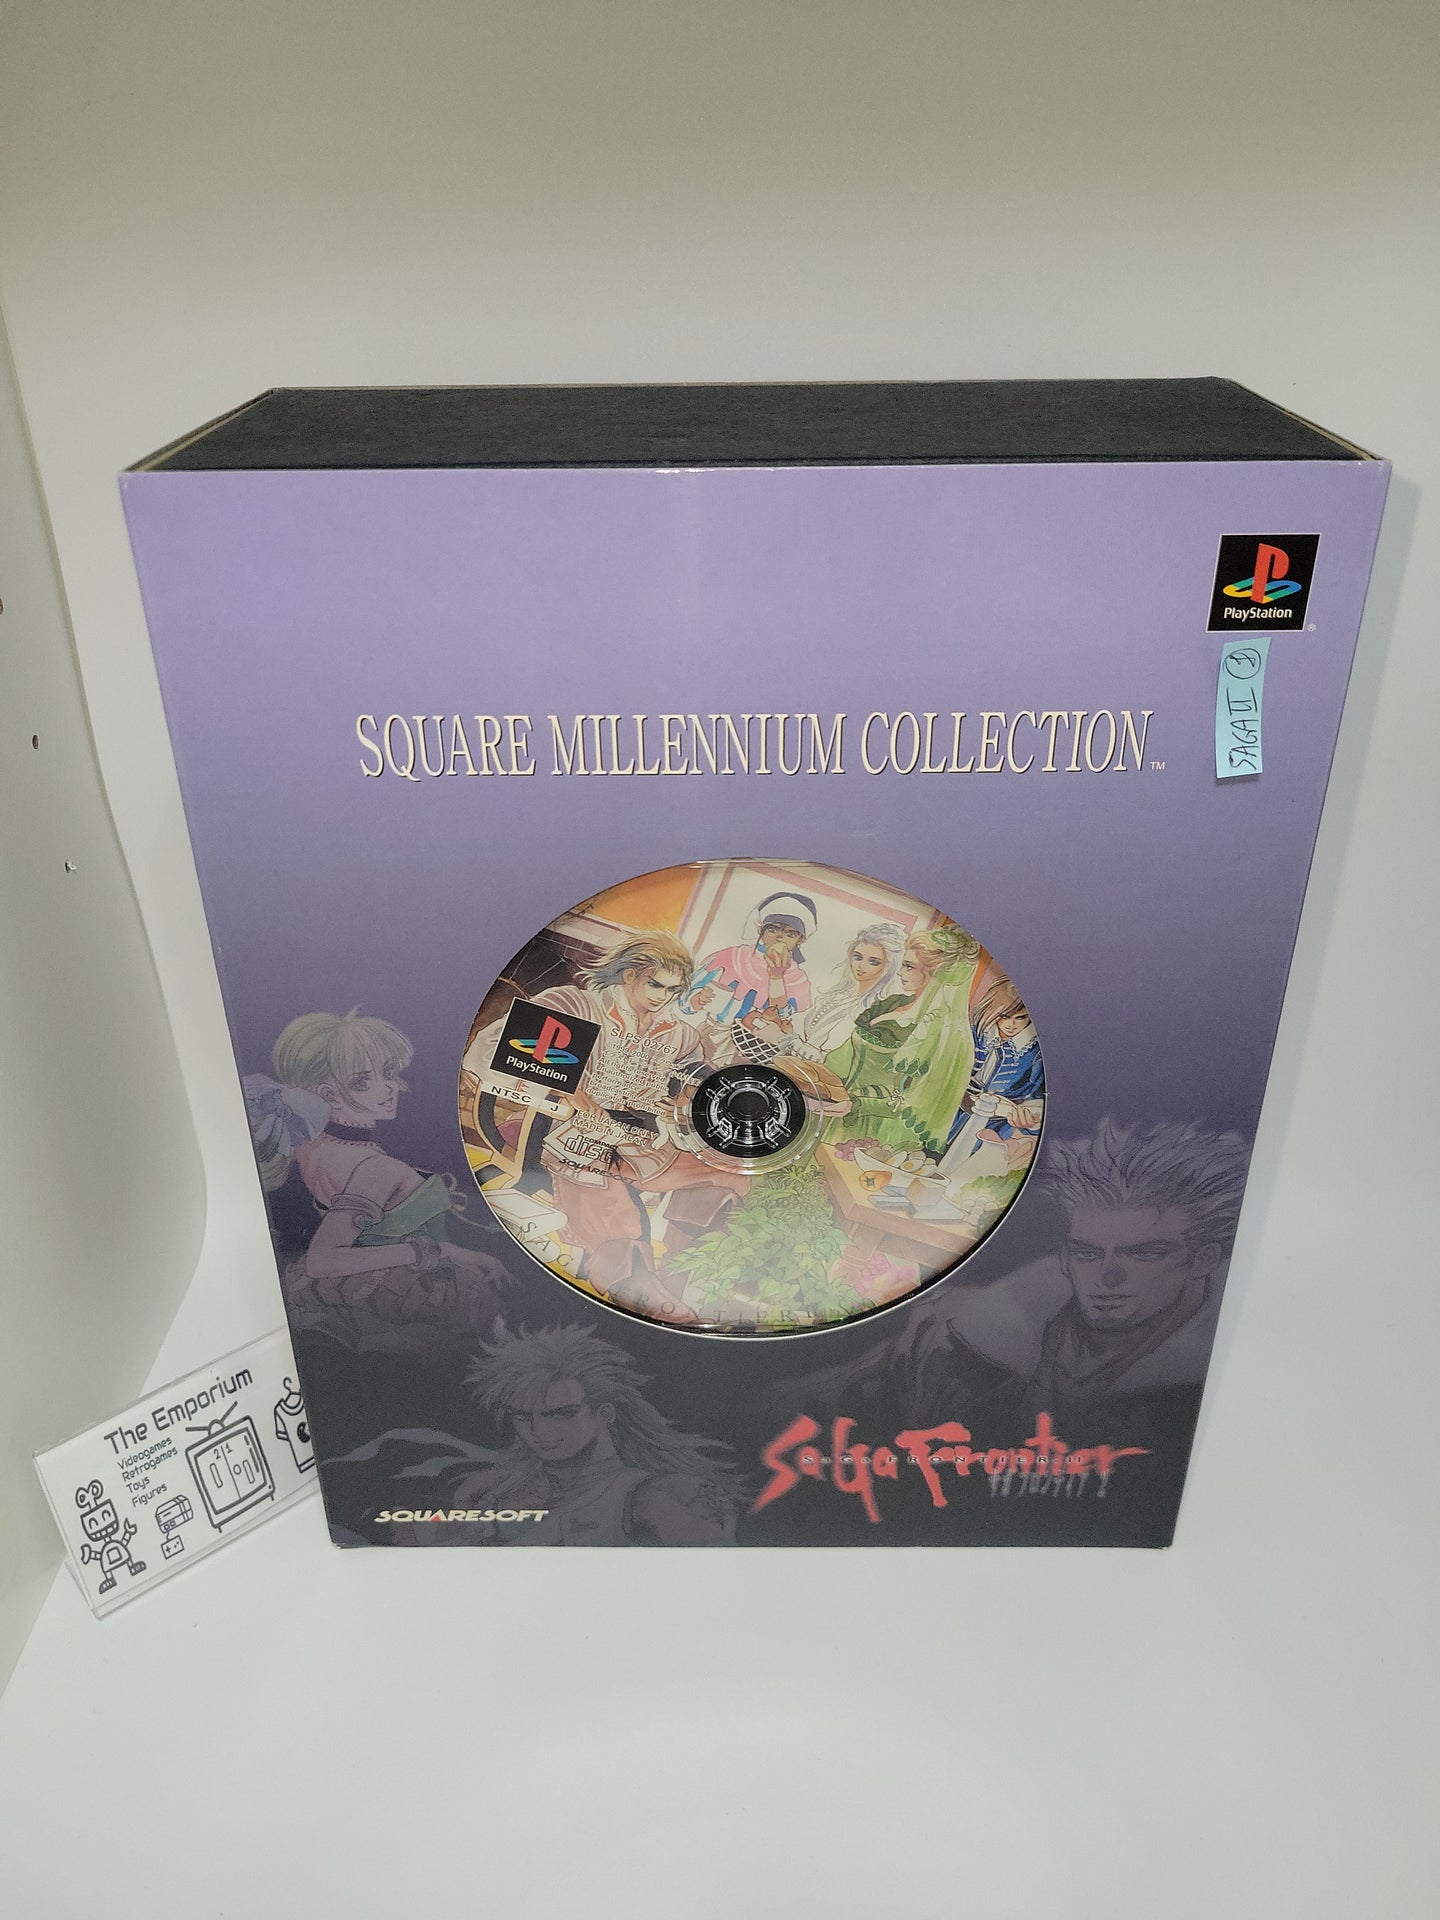 SaGa Frontier 2 [Square Millennium Collection Special Pack] - Sony PS1  Playstation